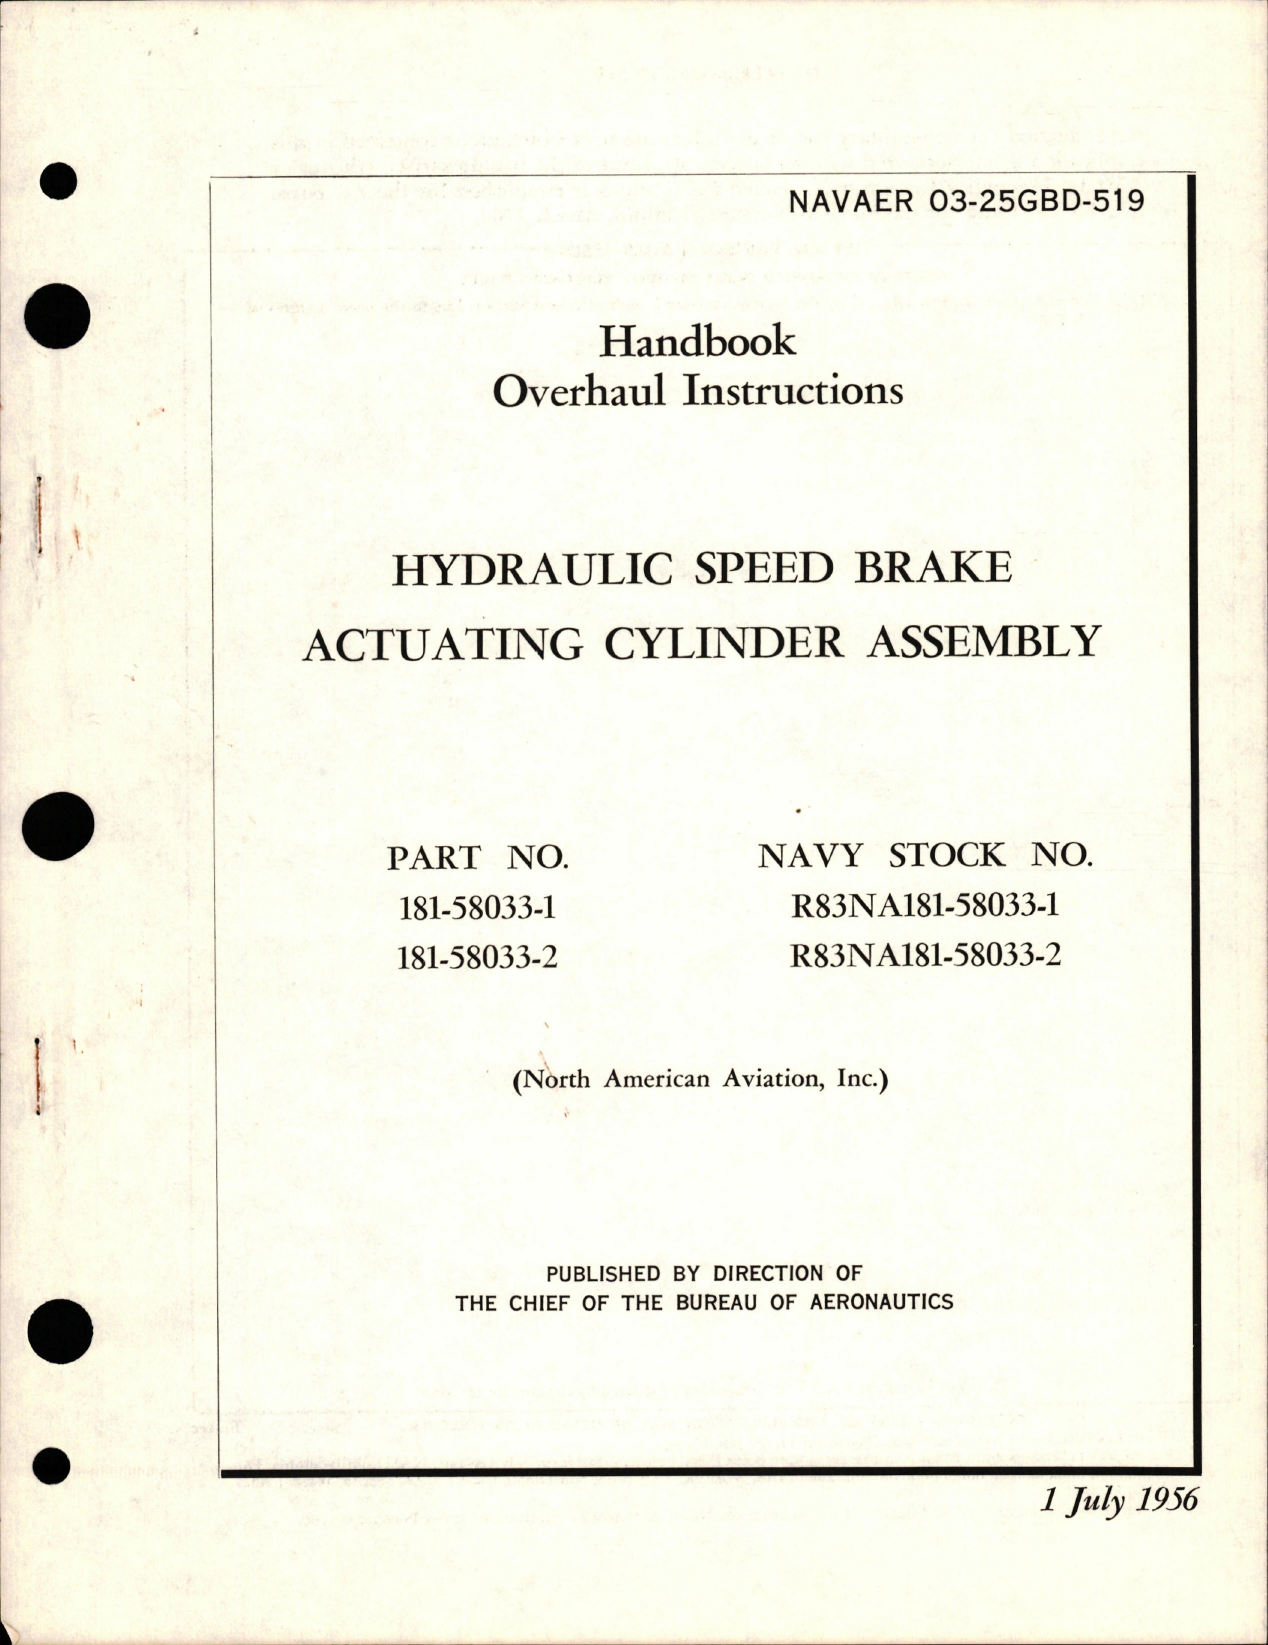 Sample page 1 from AirCorps Library document: Overhaul Instructions for Hydraulic Speed Brake Actuating Cylinder Assembly - Parts 181-58033-1 and 181-58033-2 